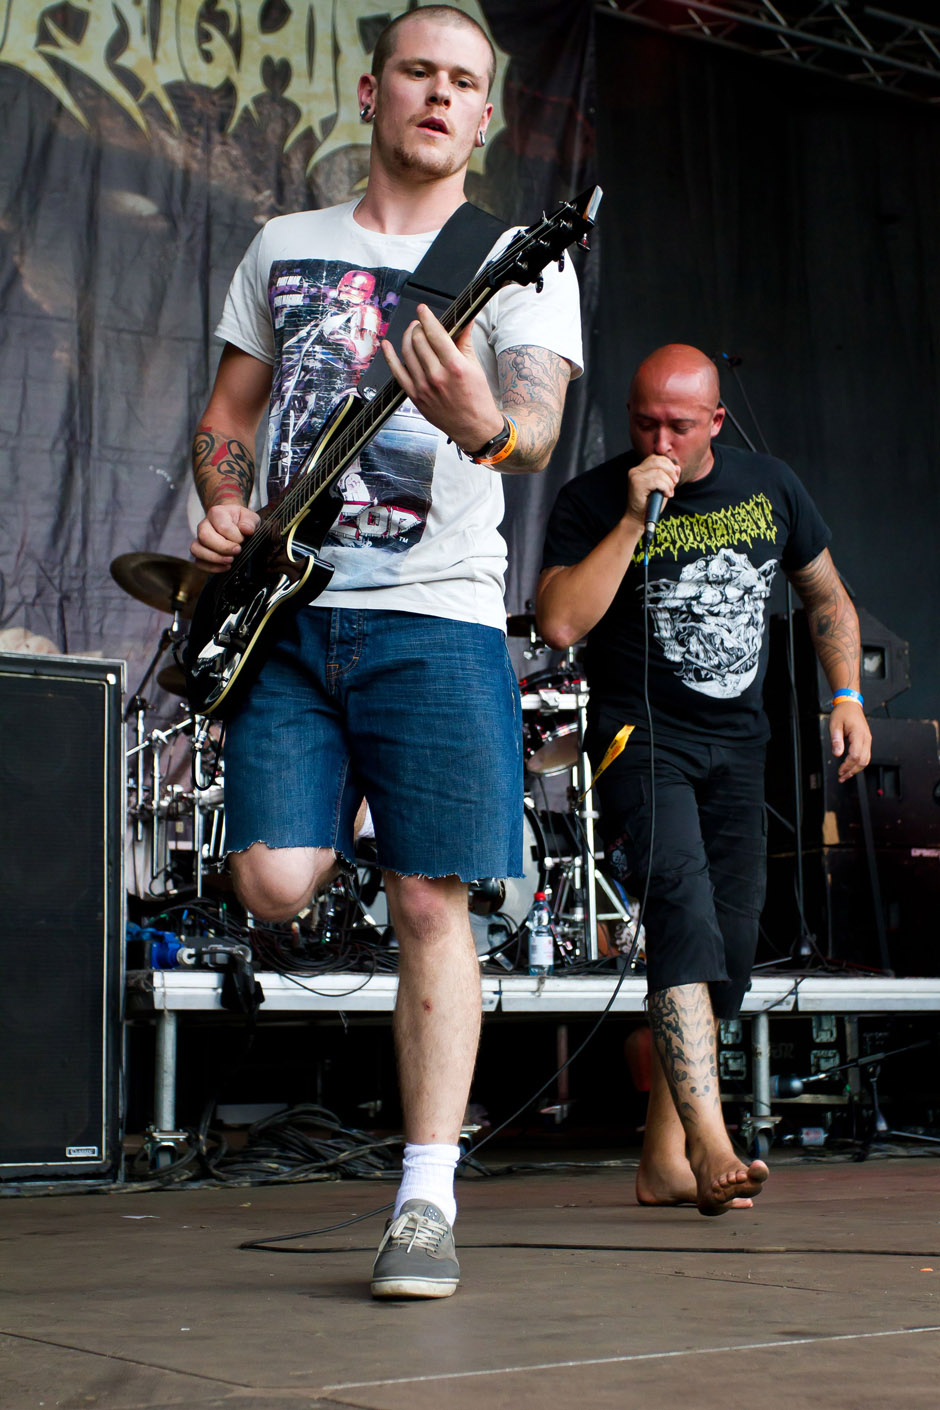 Benighted live, Extremefest 2012 in Hünxe